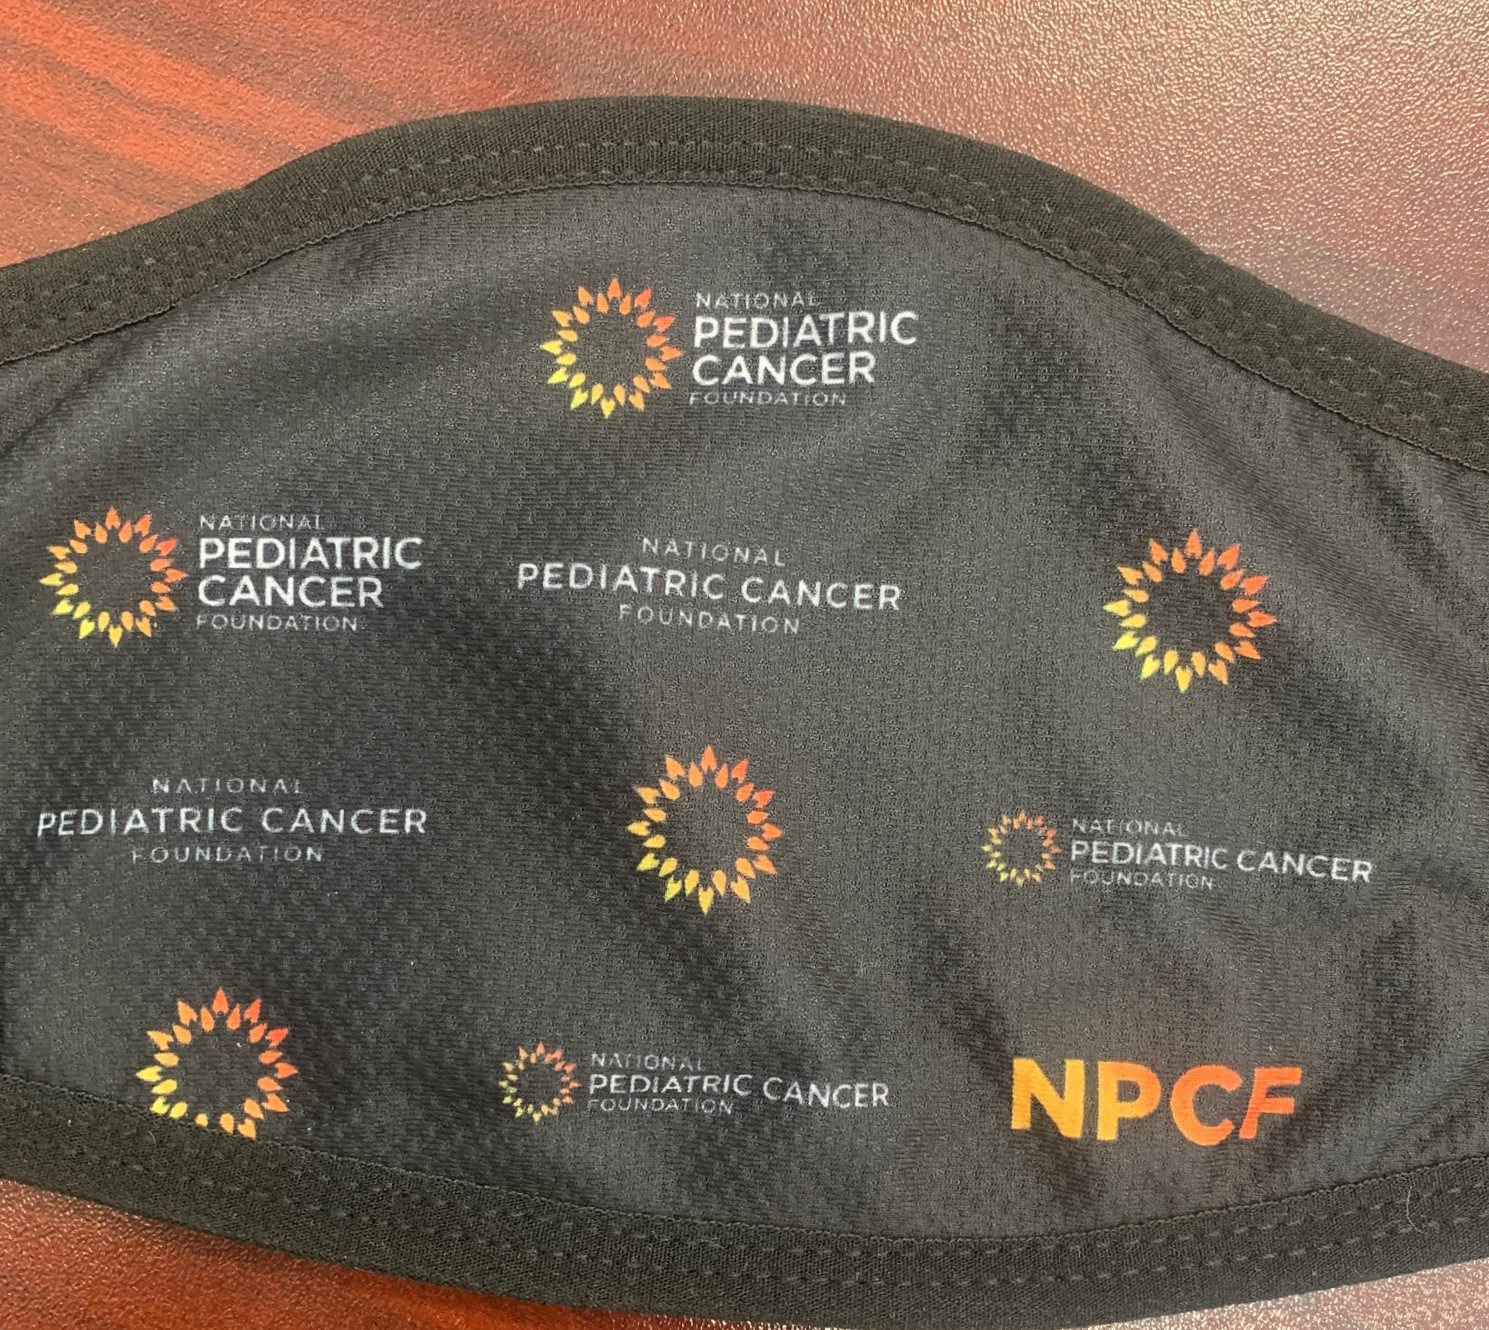 Donate $100 or above to receive a NPCF Face Mask